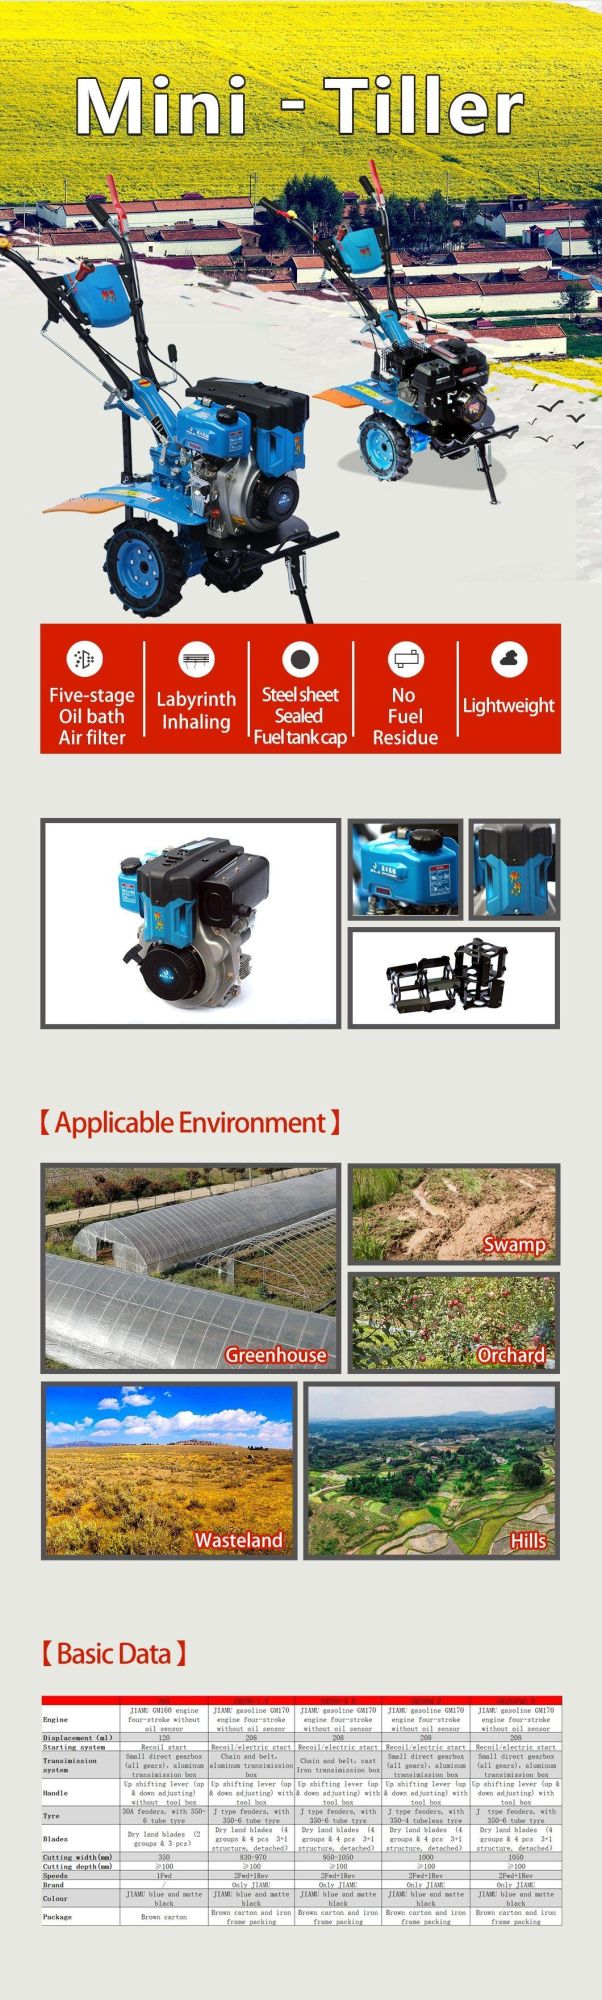 Jiamu GM500-1 D with GM170 All Gear Aluminum transmission Box Agricultural Machinery Petrol D-Style Tiller for Sale